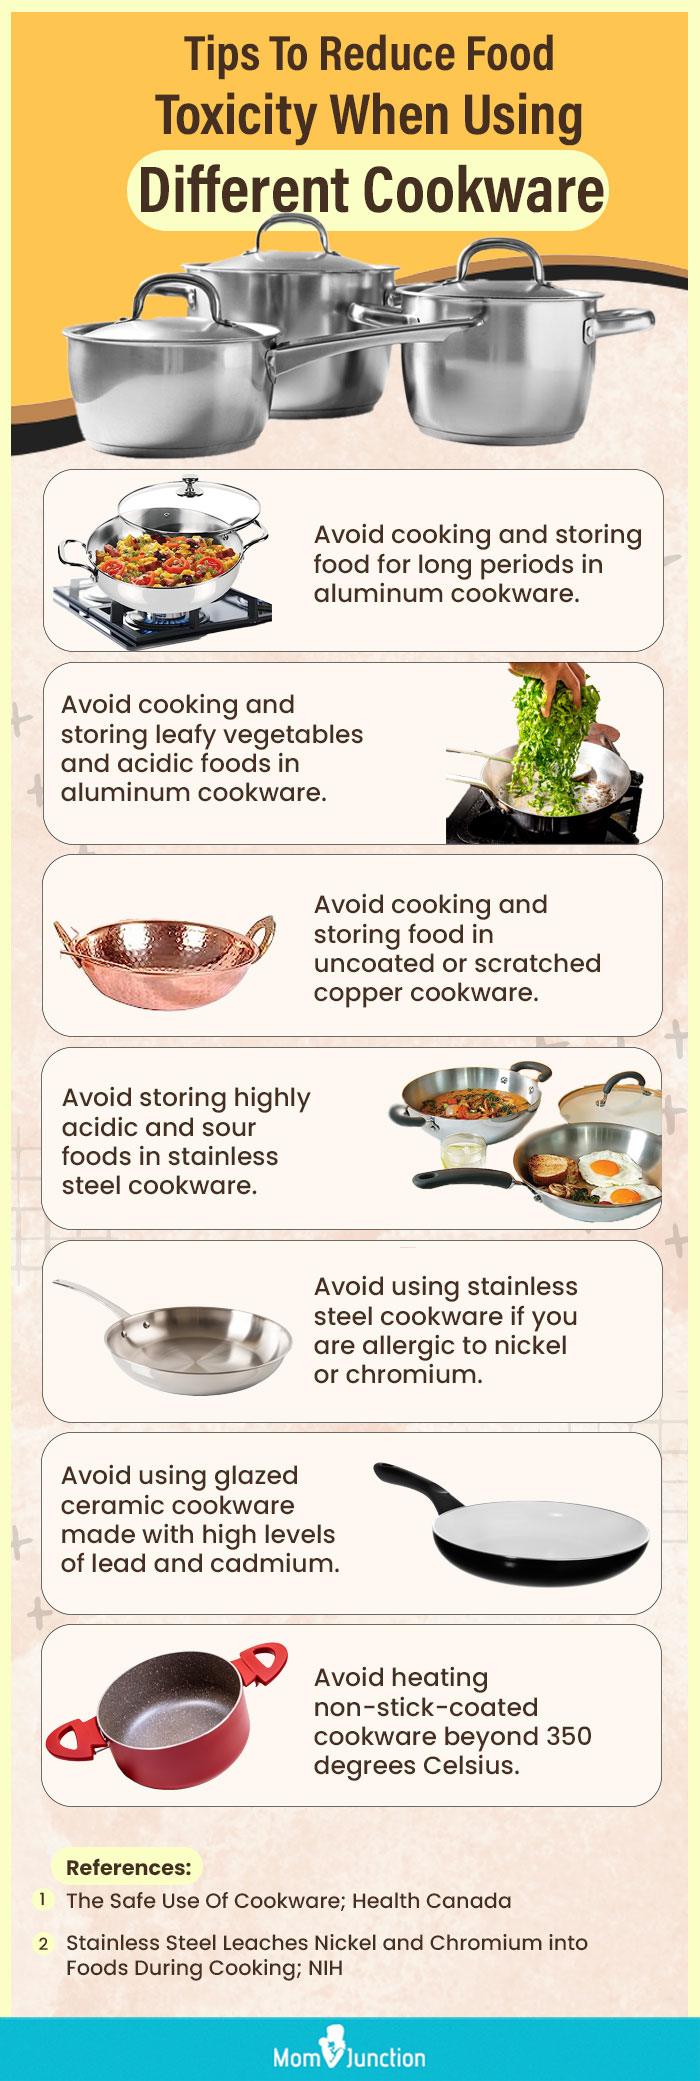 Tips To Reduce Food Toxicity When Using Different Cookware (infographic)